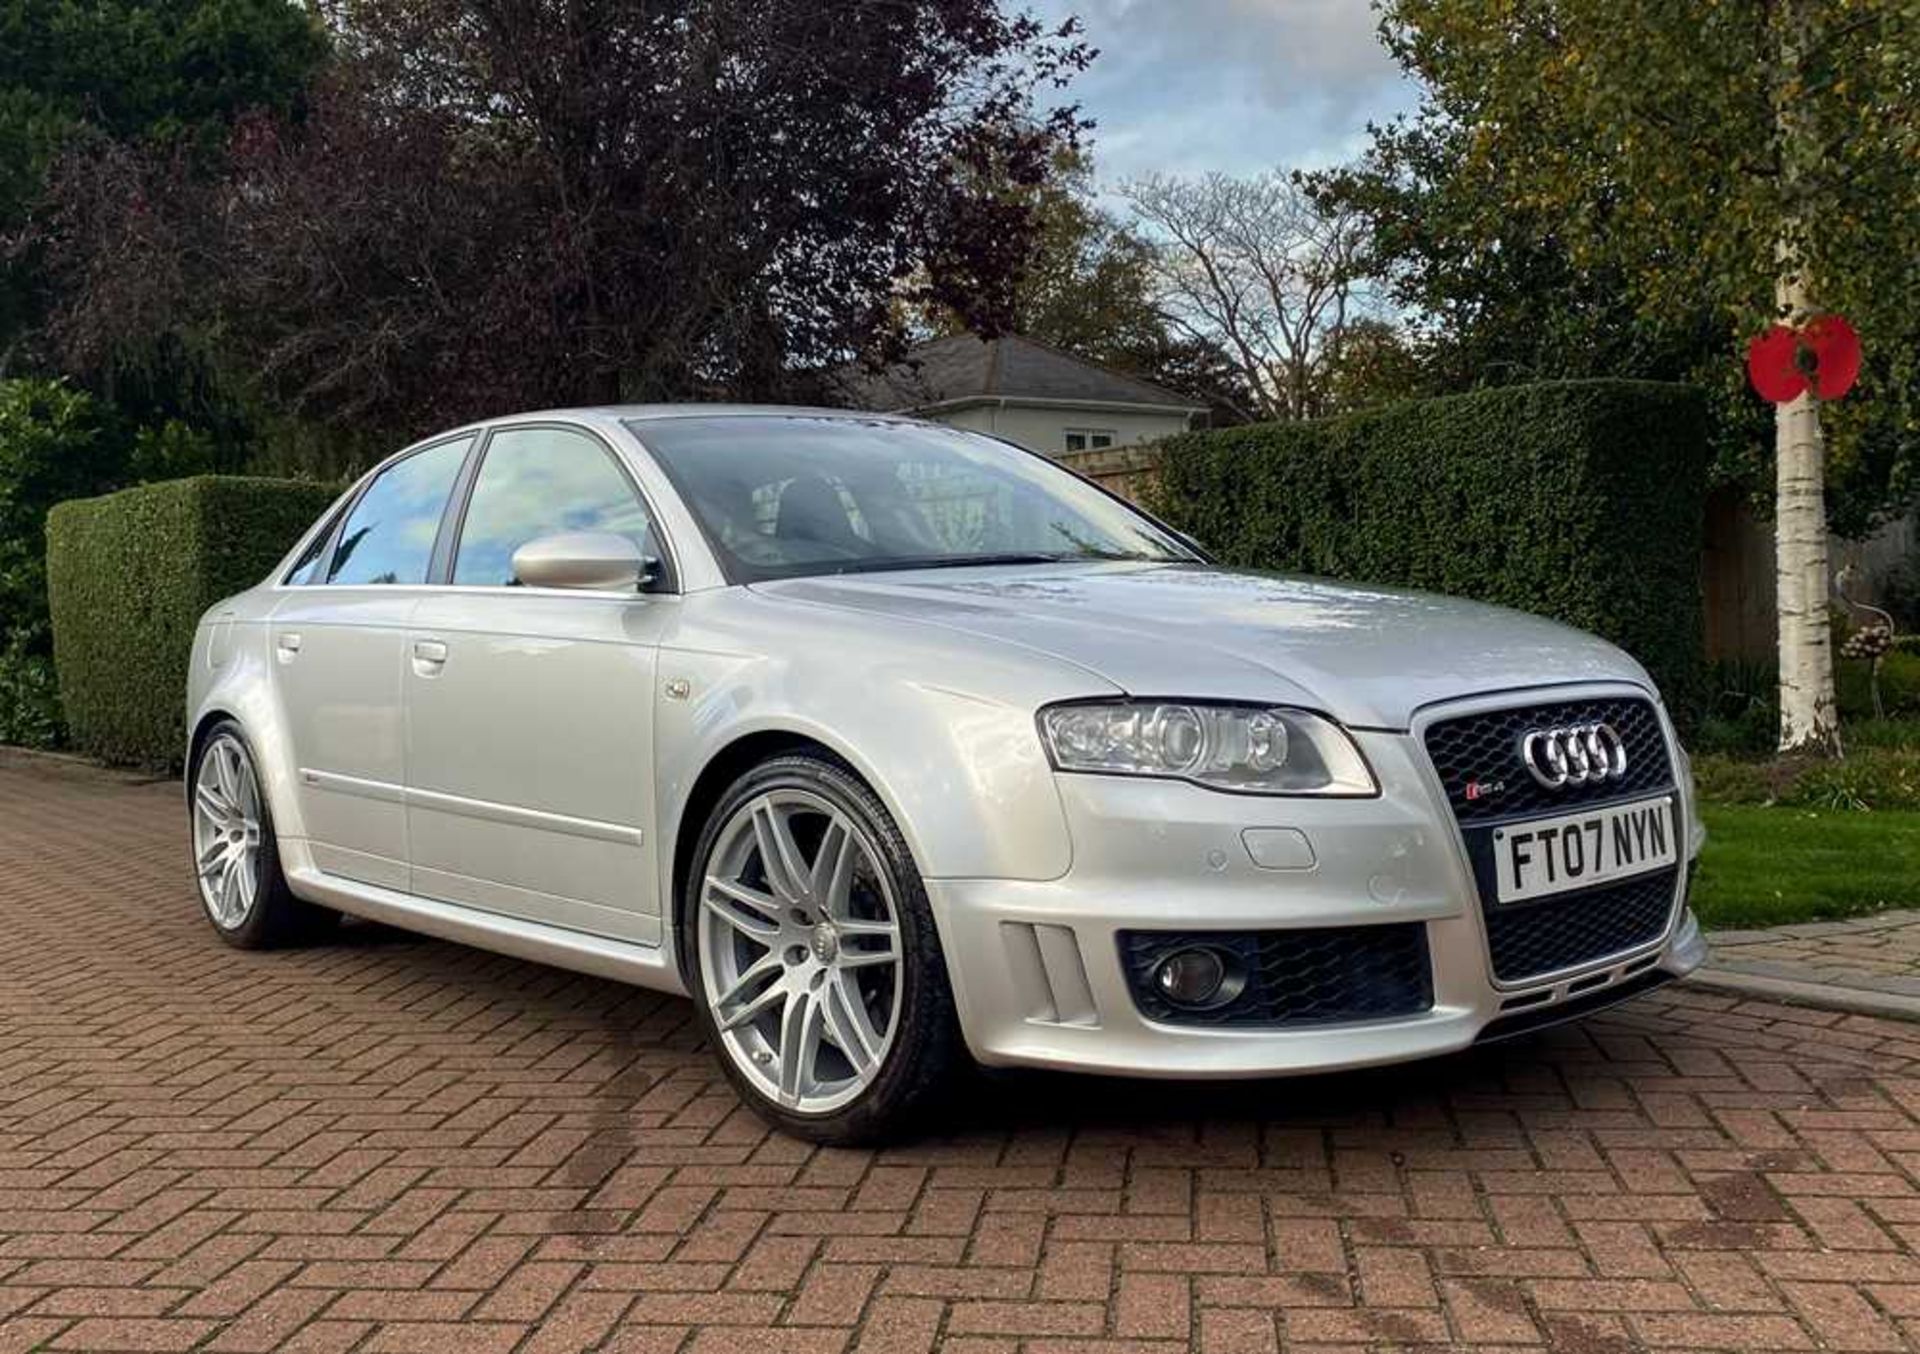 2007 Audi RS4 Saloon One owner and just c.60,000 miles from new